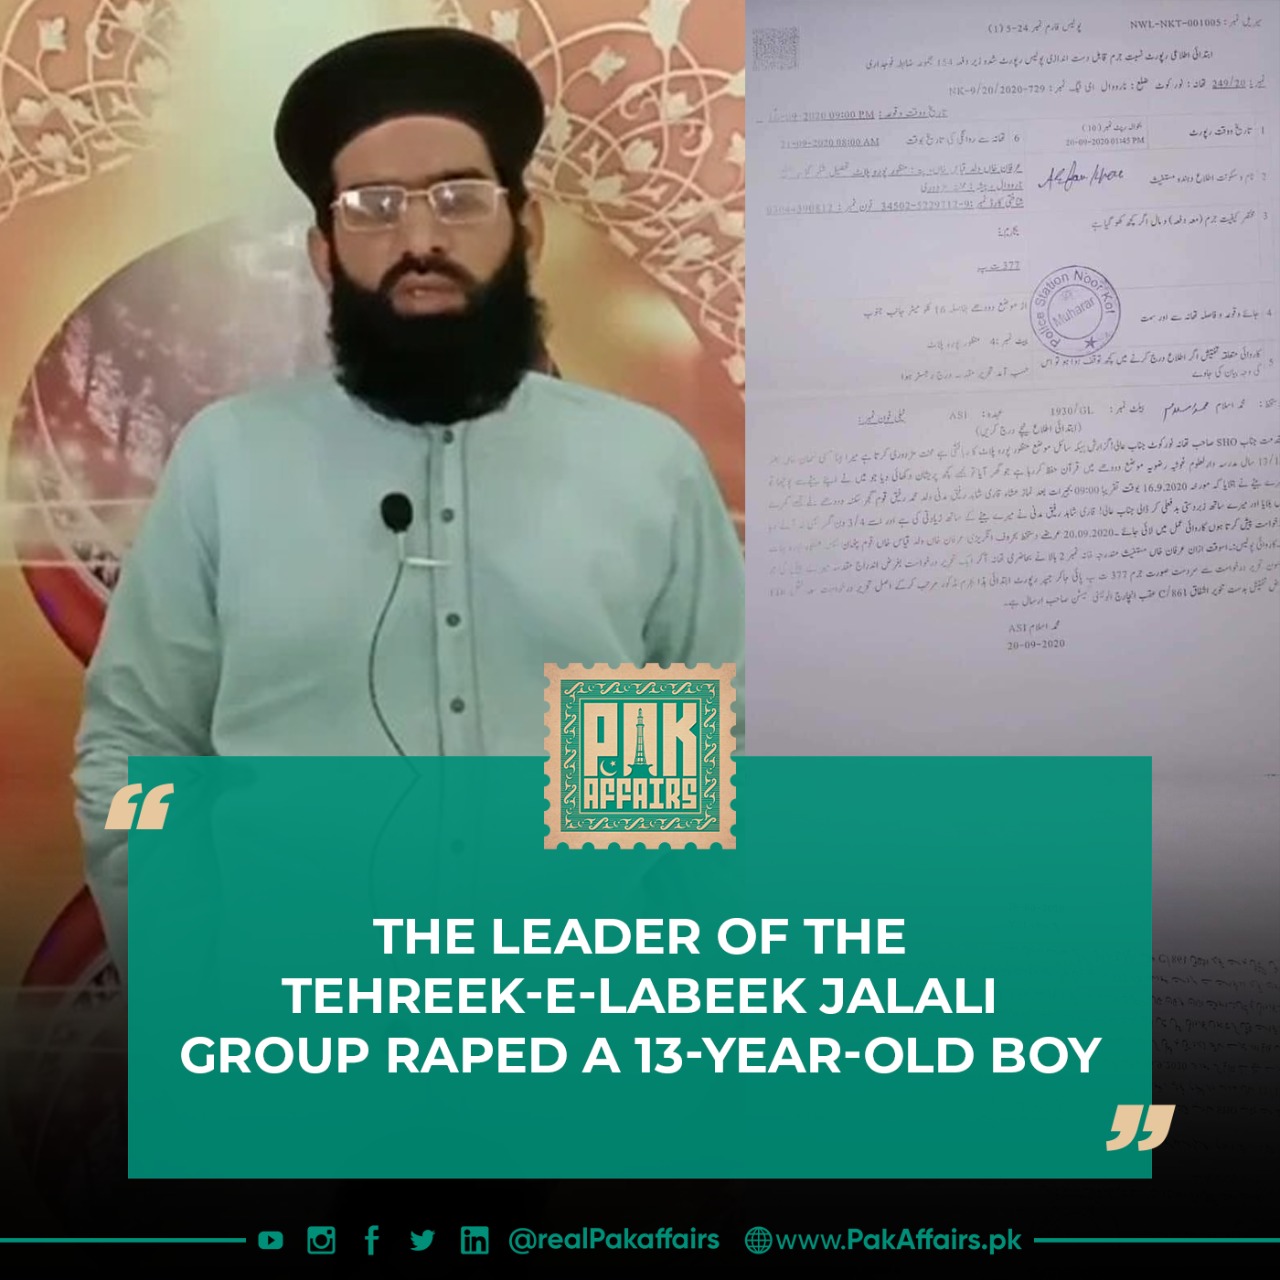 The leader of the Tehreek-e-Labeek Jalali group raped a 13-year-old boy